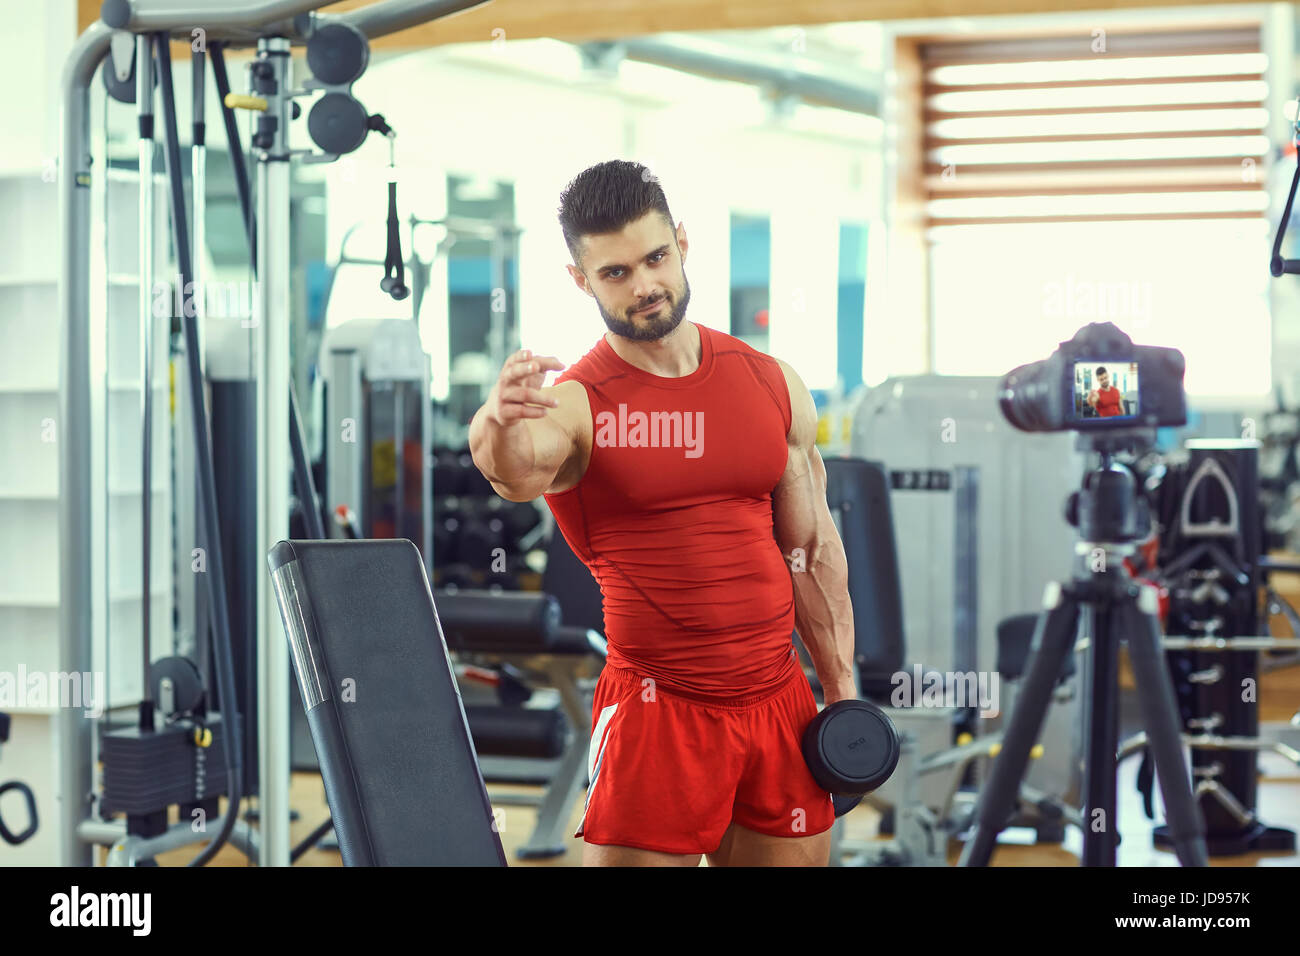 Vlogger sportsman makes a video in the gym Stock Photo